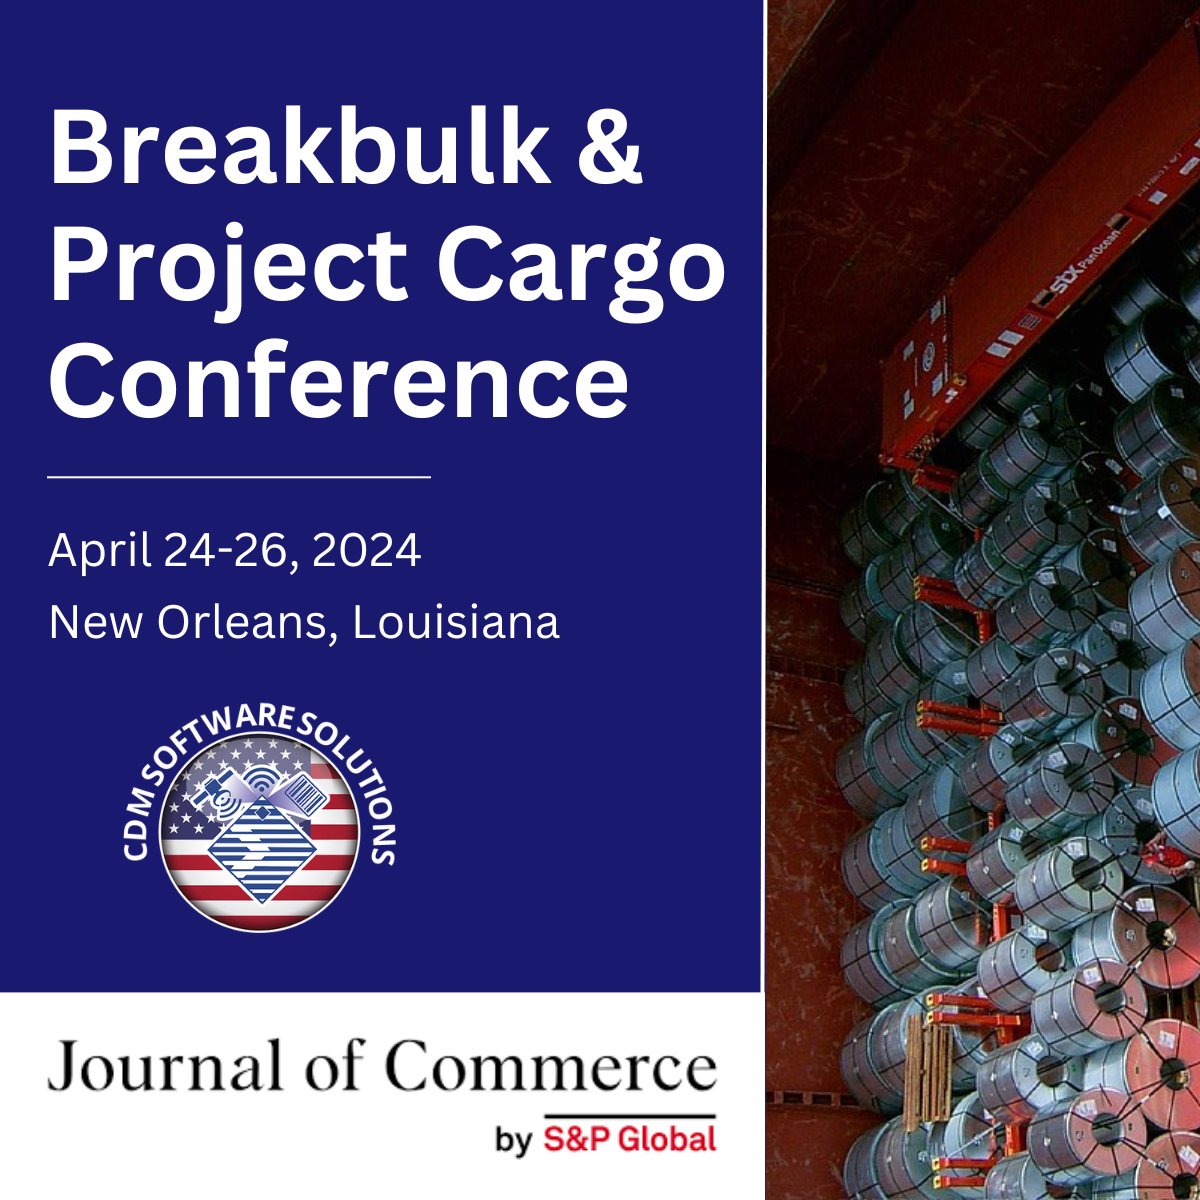 Any of you #freightforwarders out there going to #breakbulk24? We'll see you there next month!
events.spglobal.com/event/216871d9…